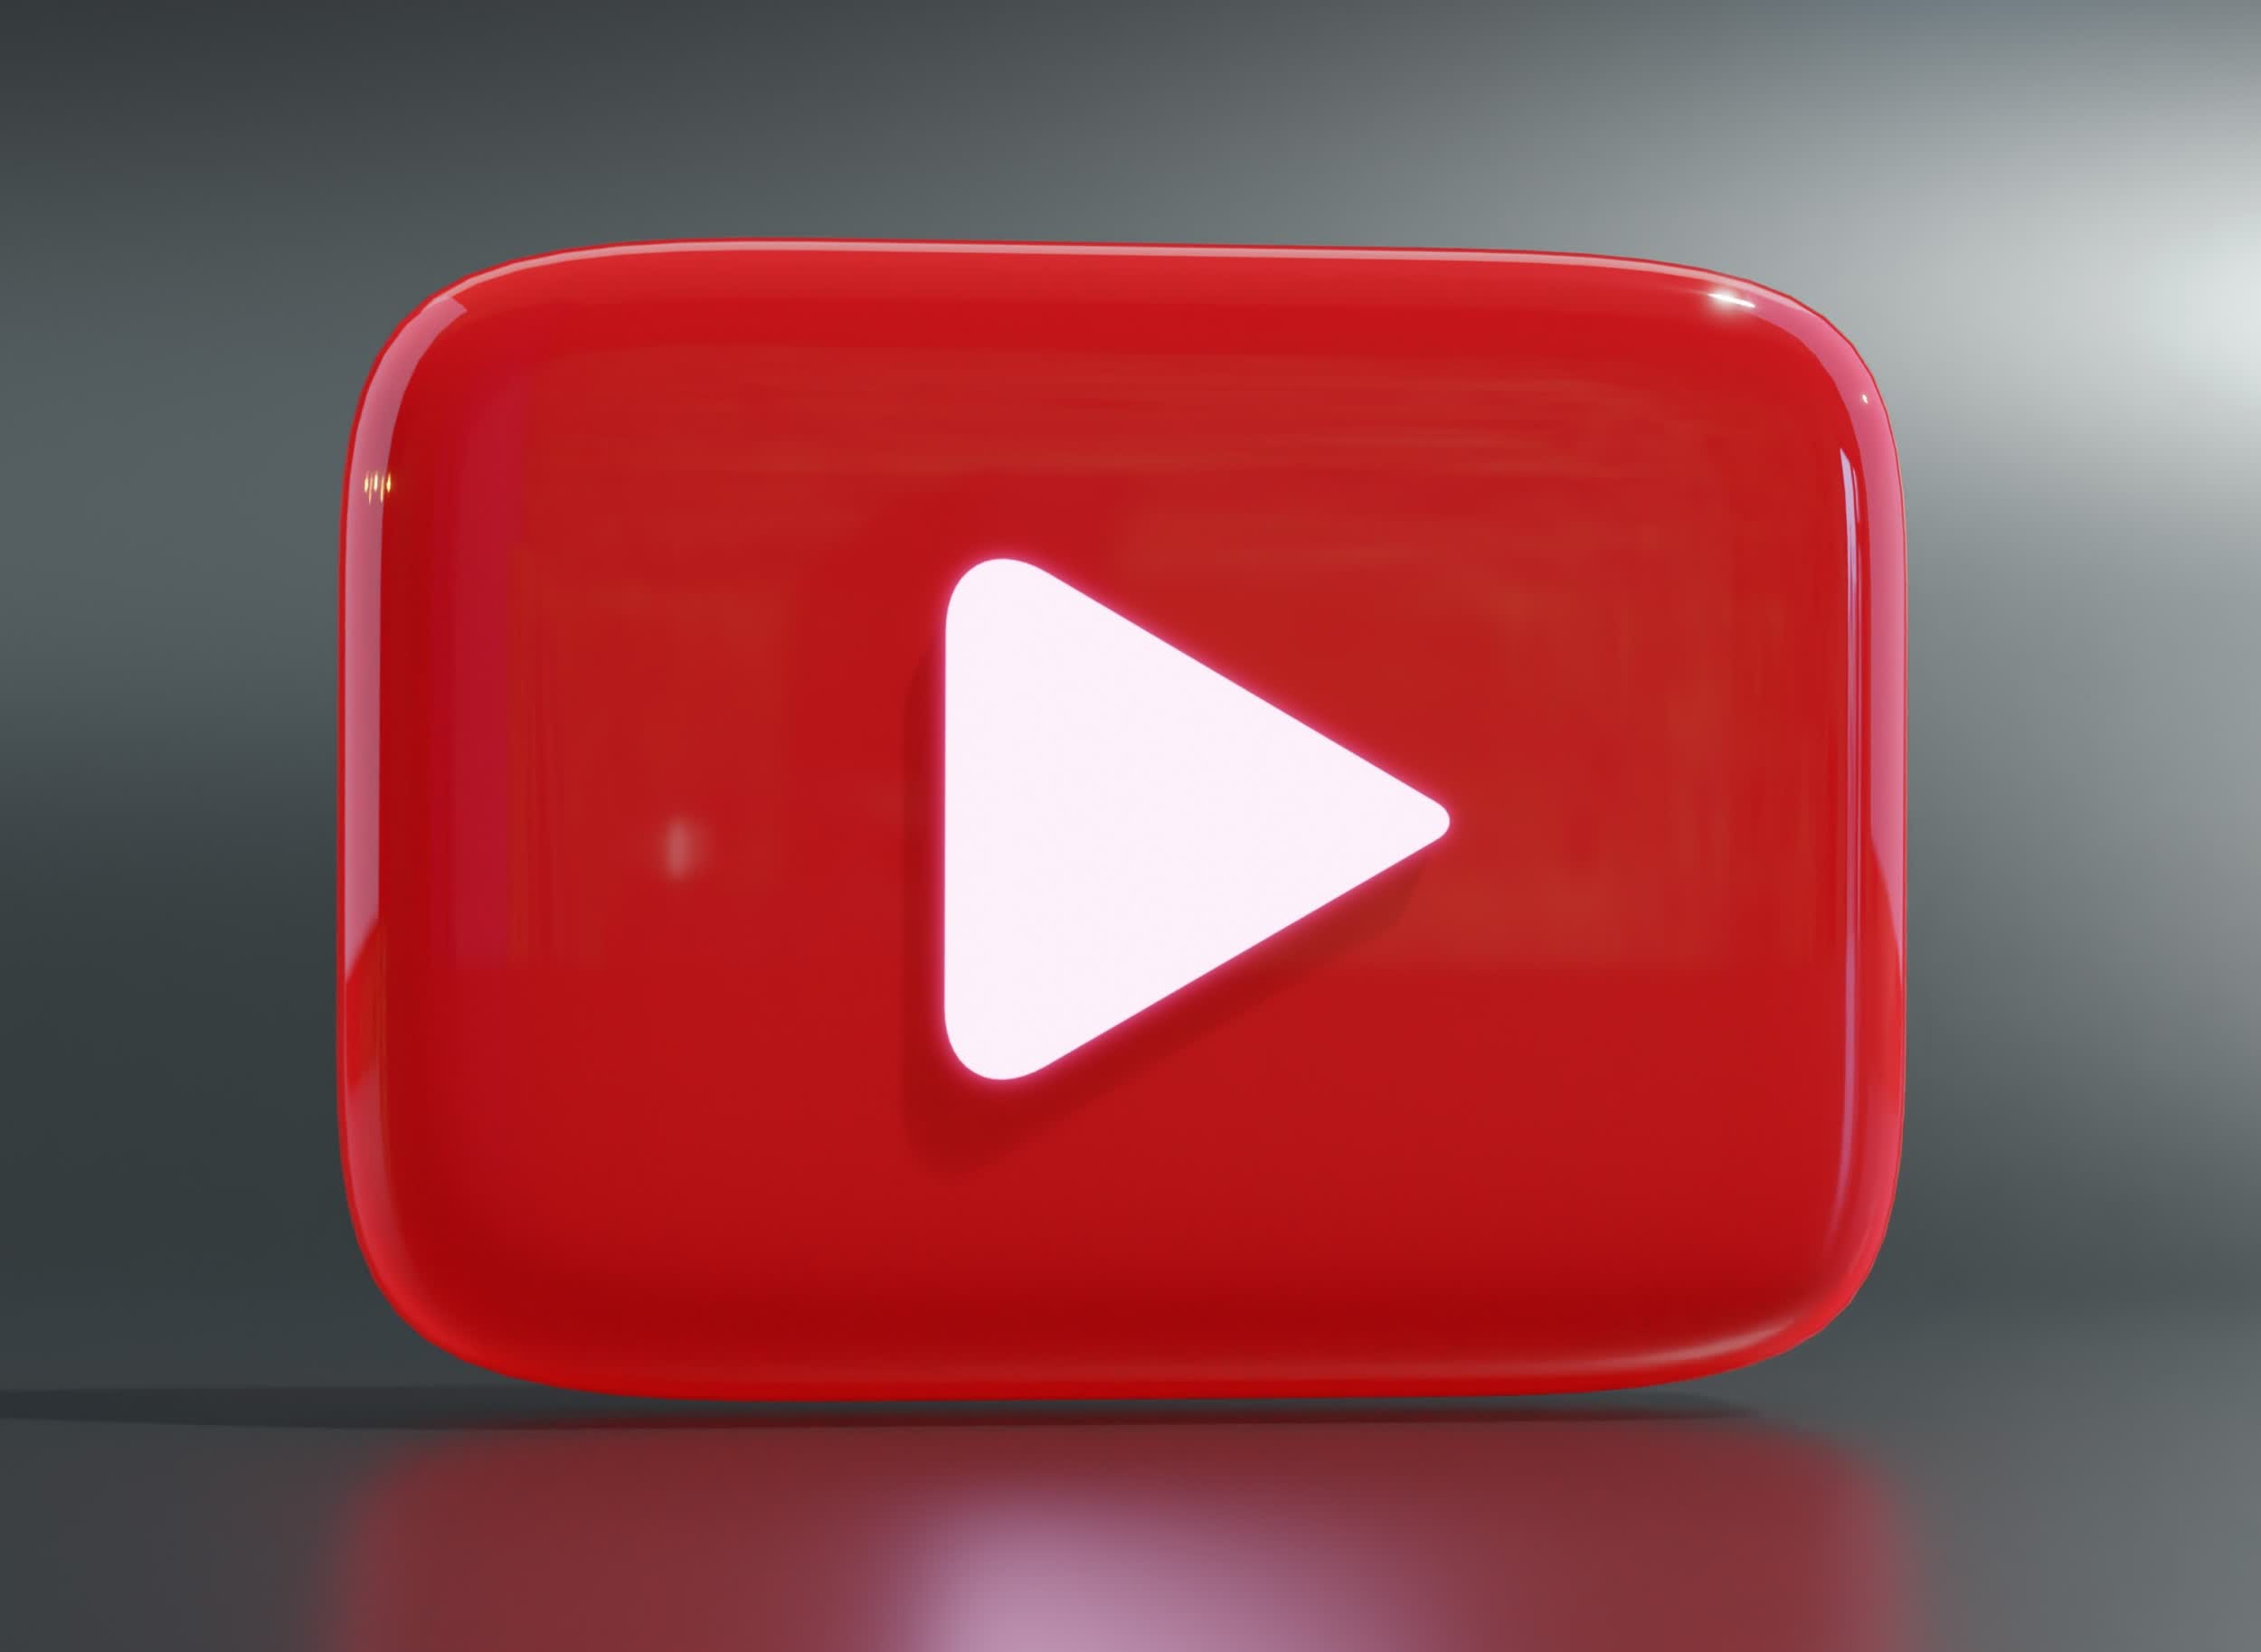 YouTube now warns users that ad blockers aren't allowed